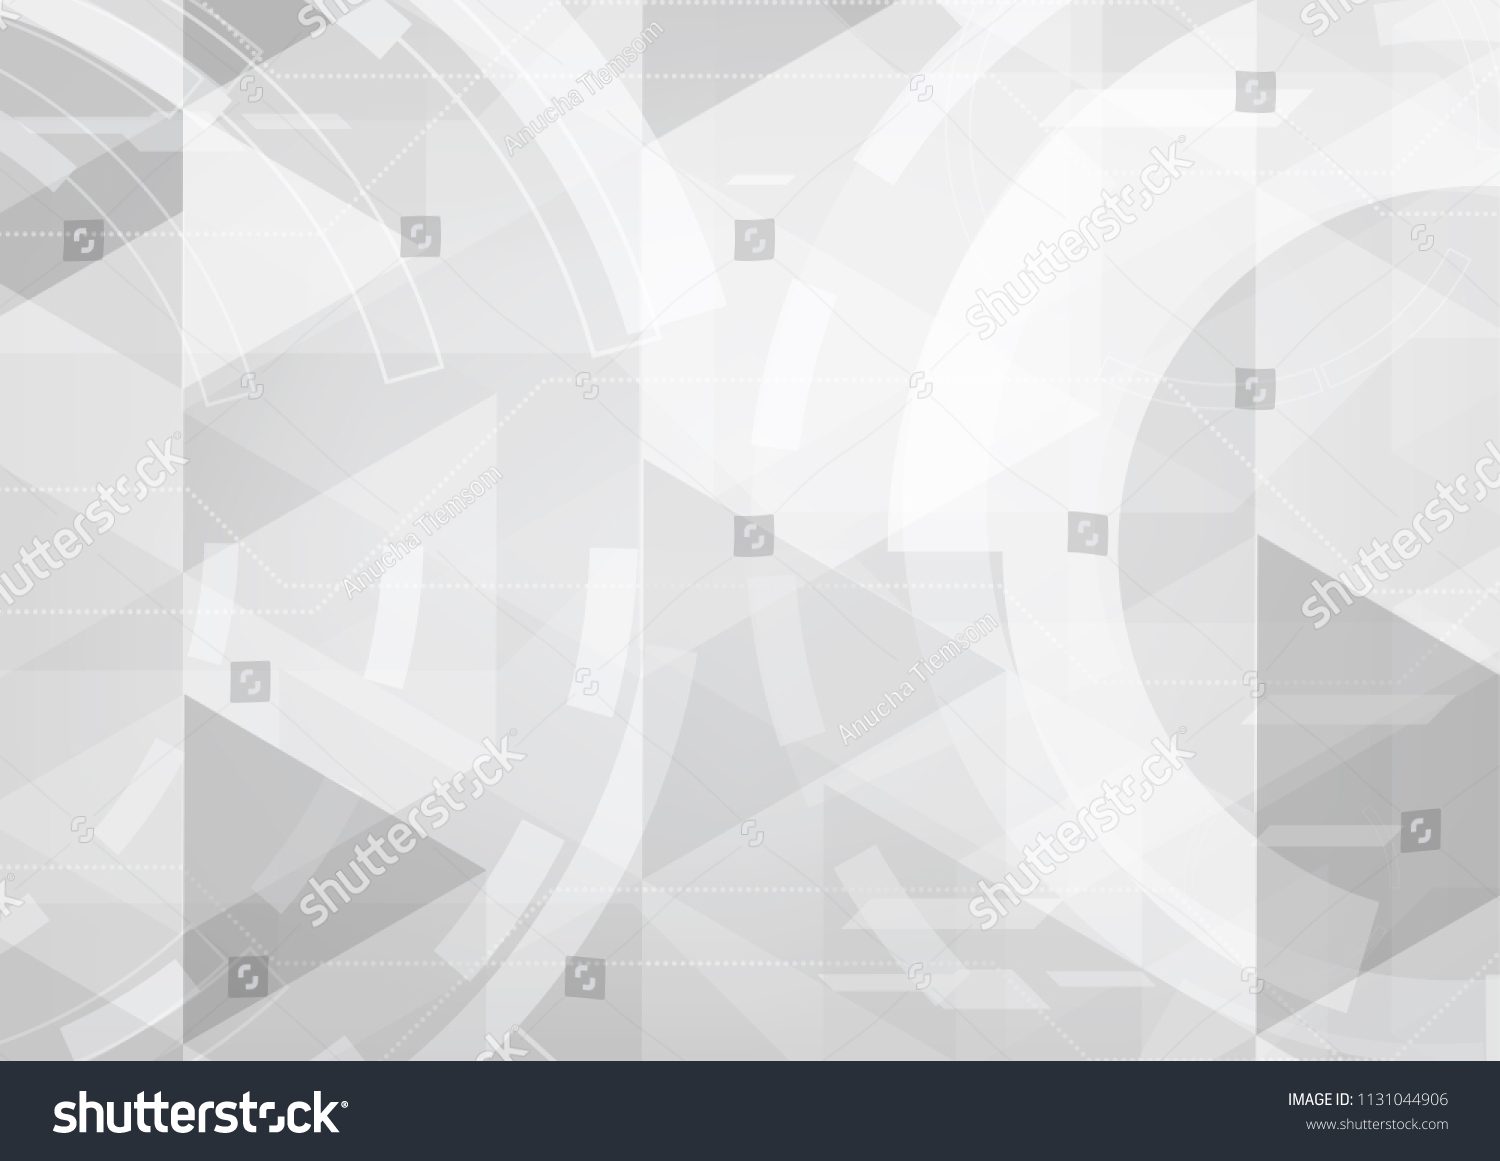 vector background abstract technology communication concept #1131044906